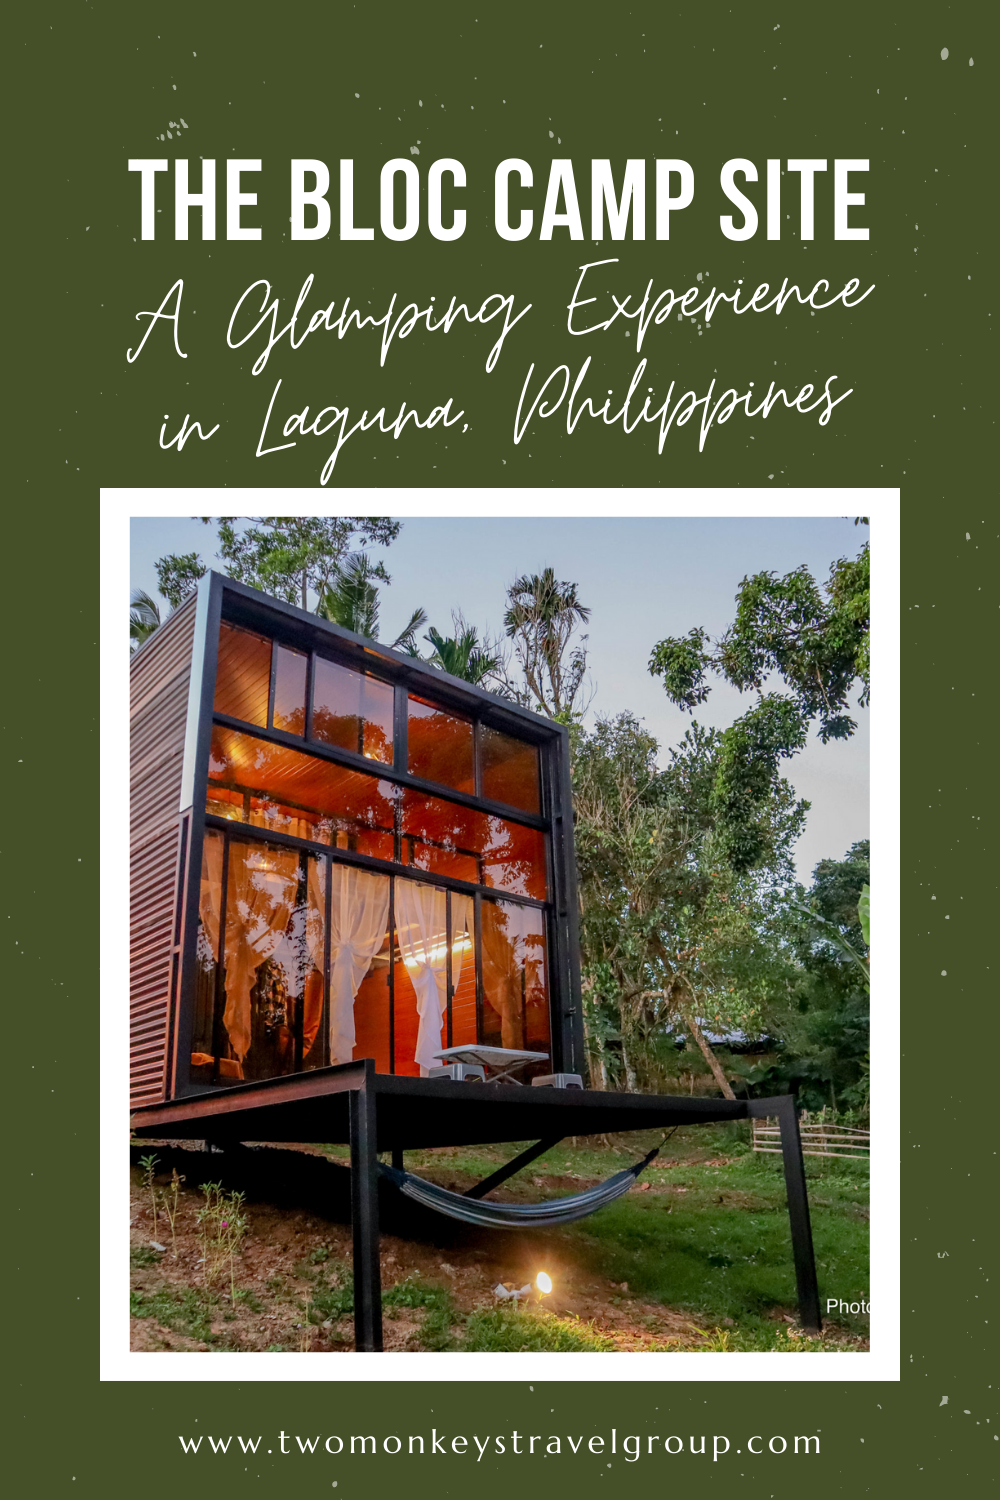 The Bloc Camp Site A Glamping Experience in Laguna, Philippines